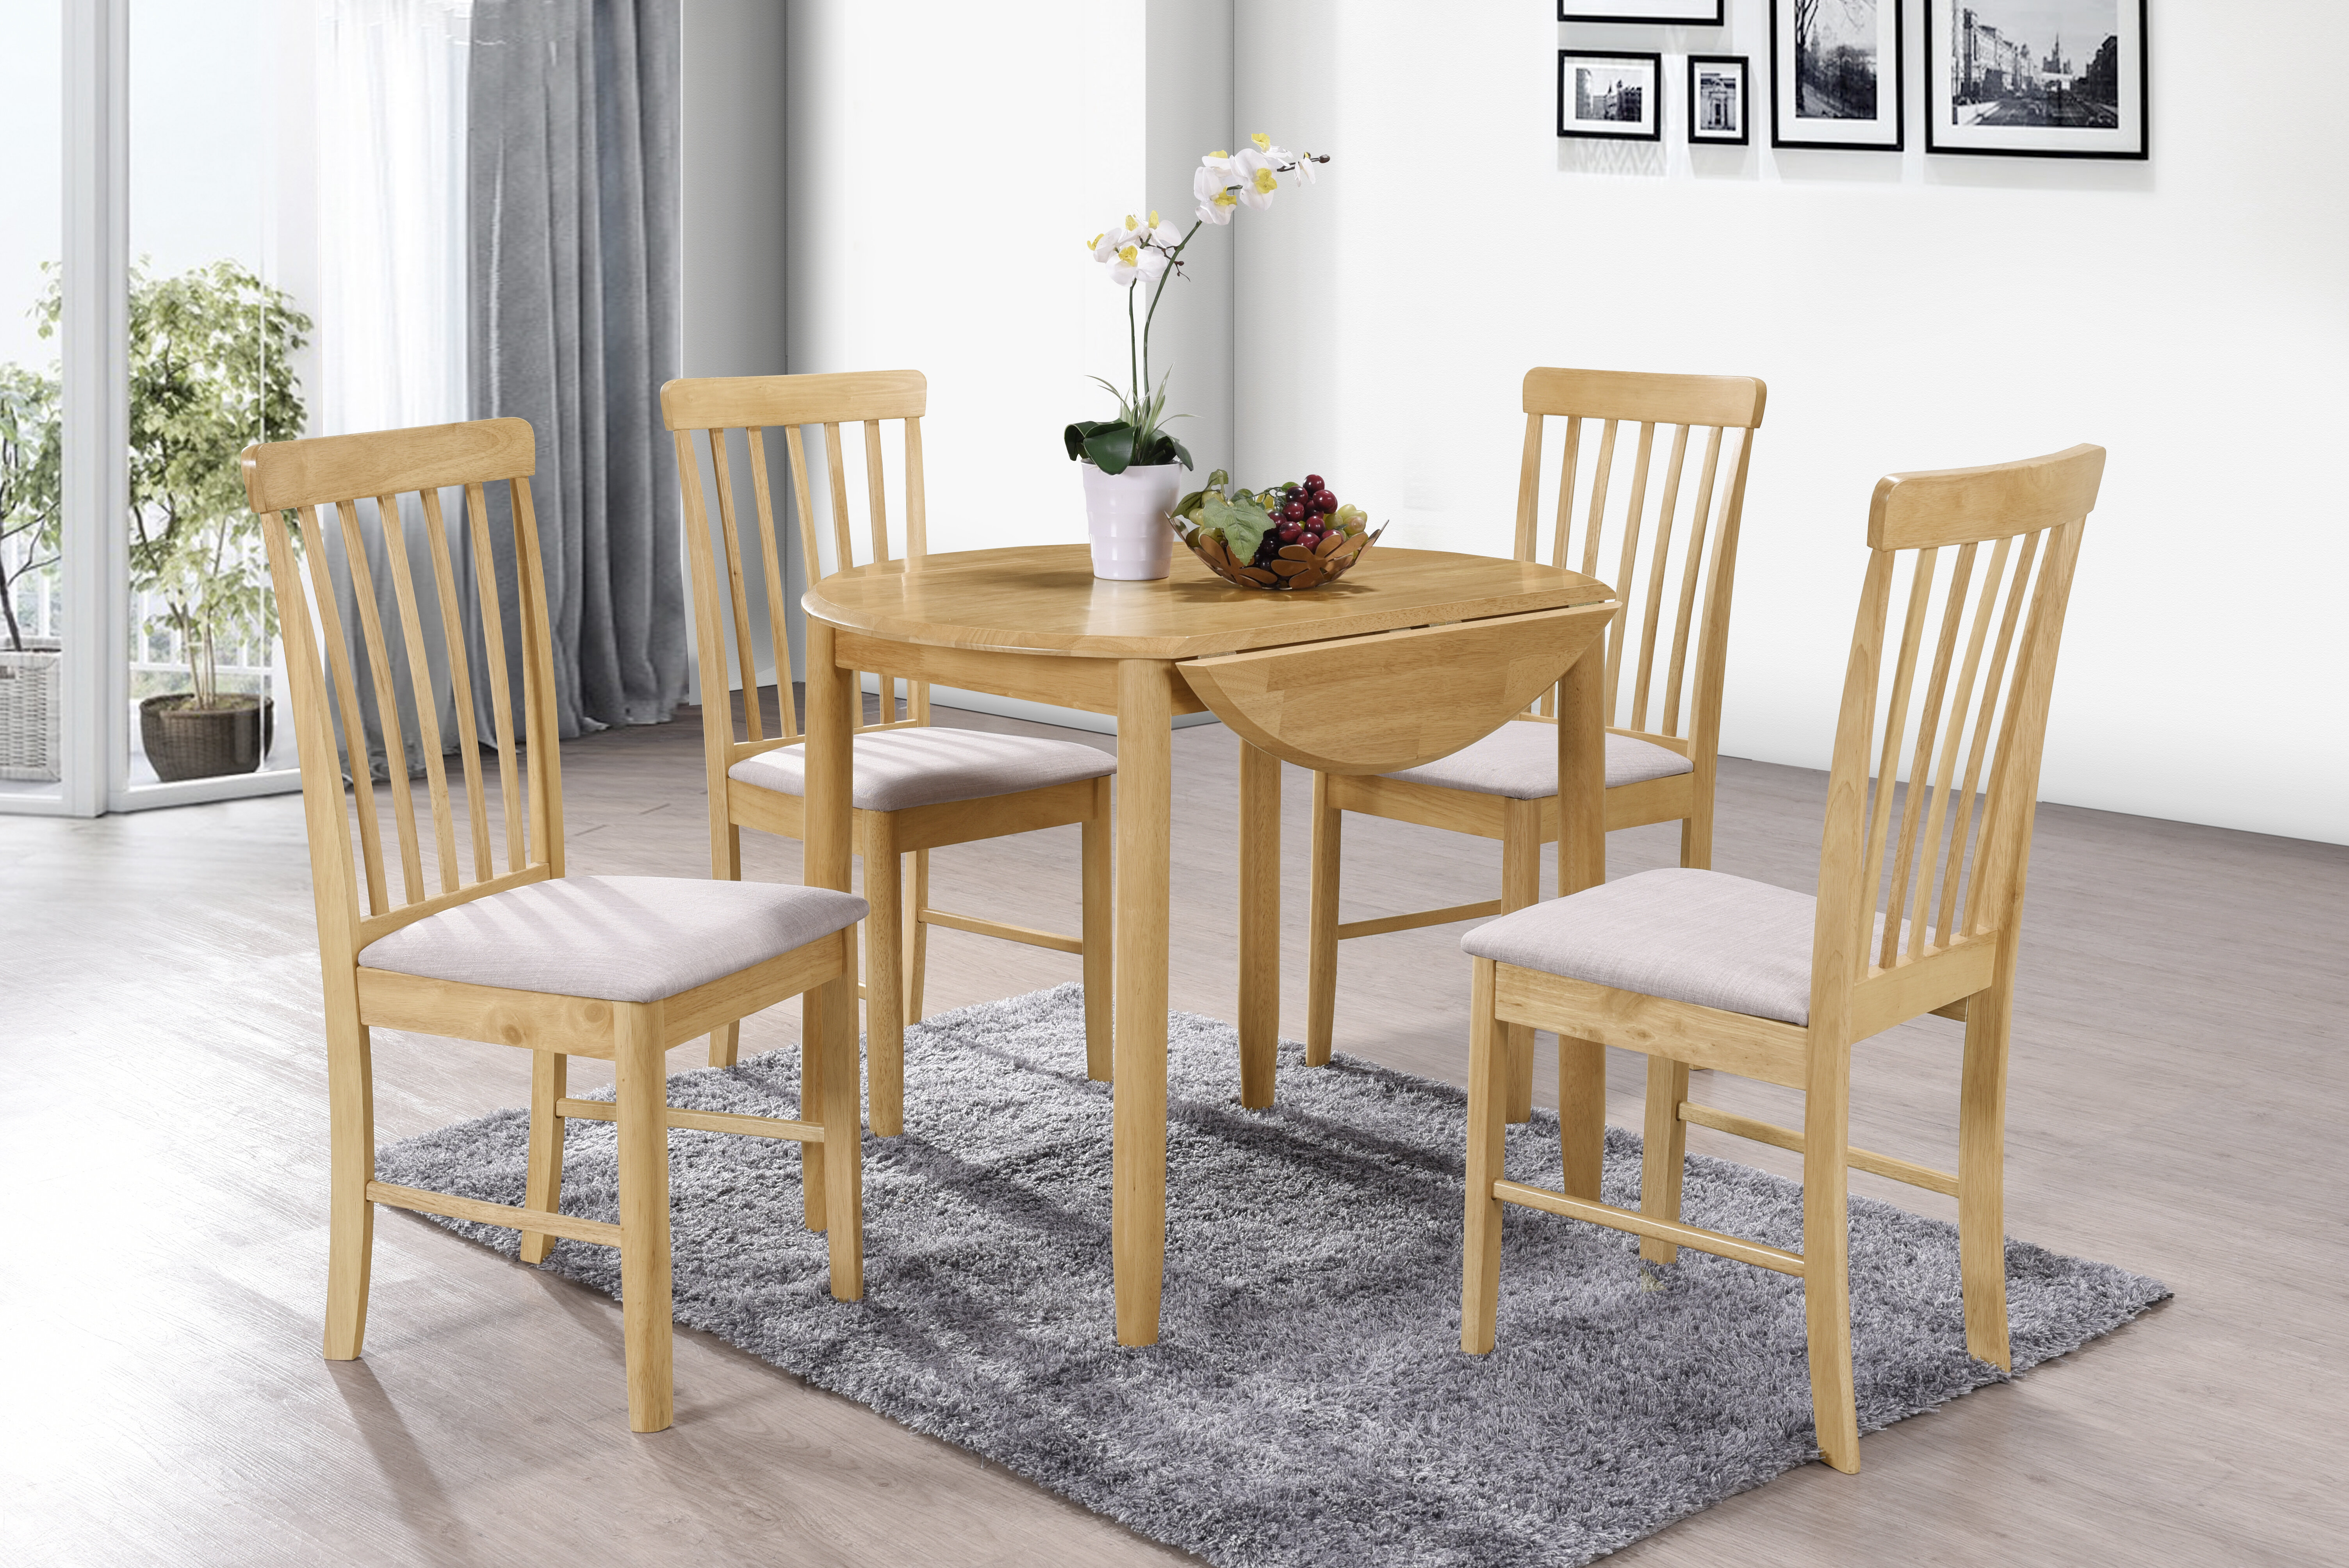 Brambly Cottage Adira Folding Dining Set With 4 Chairs Reviews